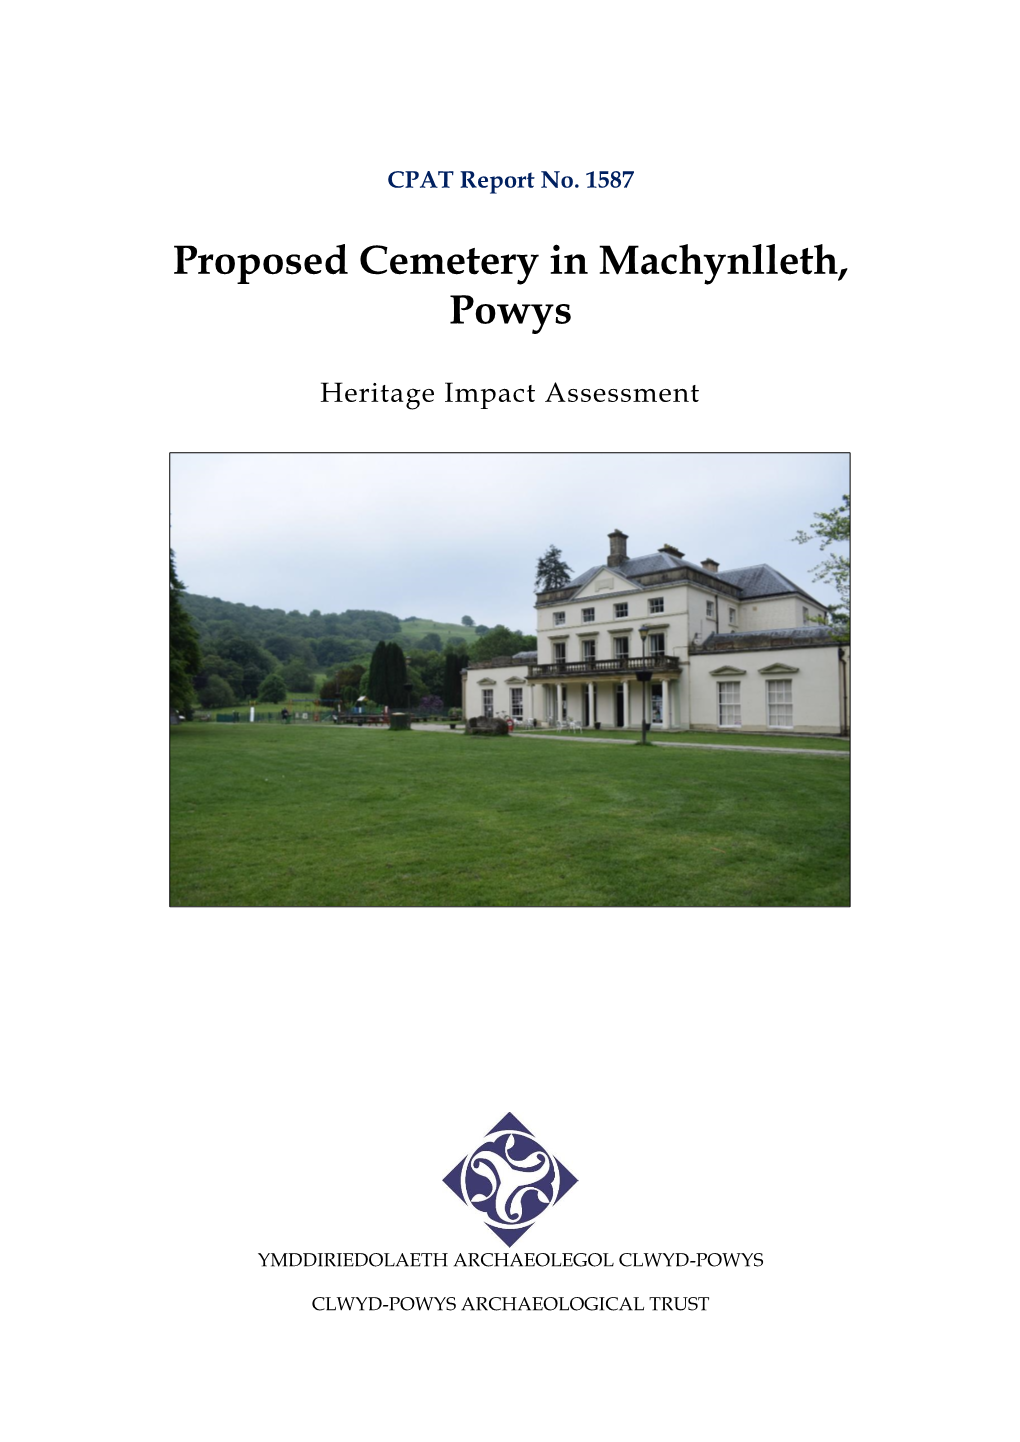 Proposed Cemetery in Machynlleth, Powys